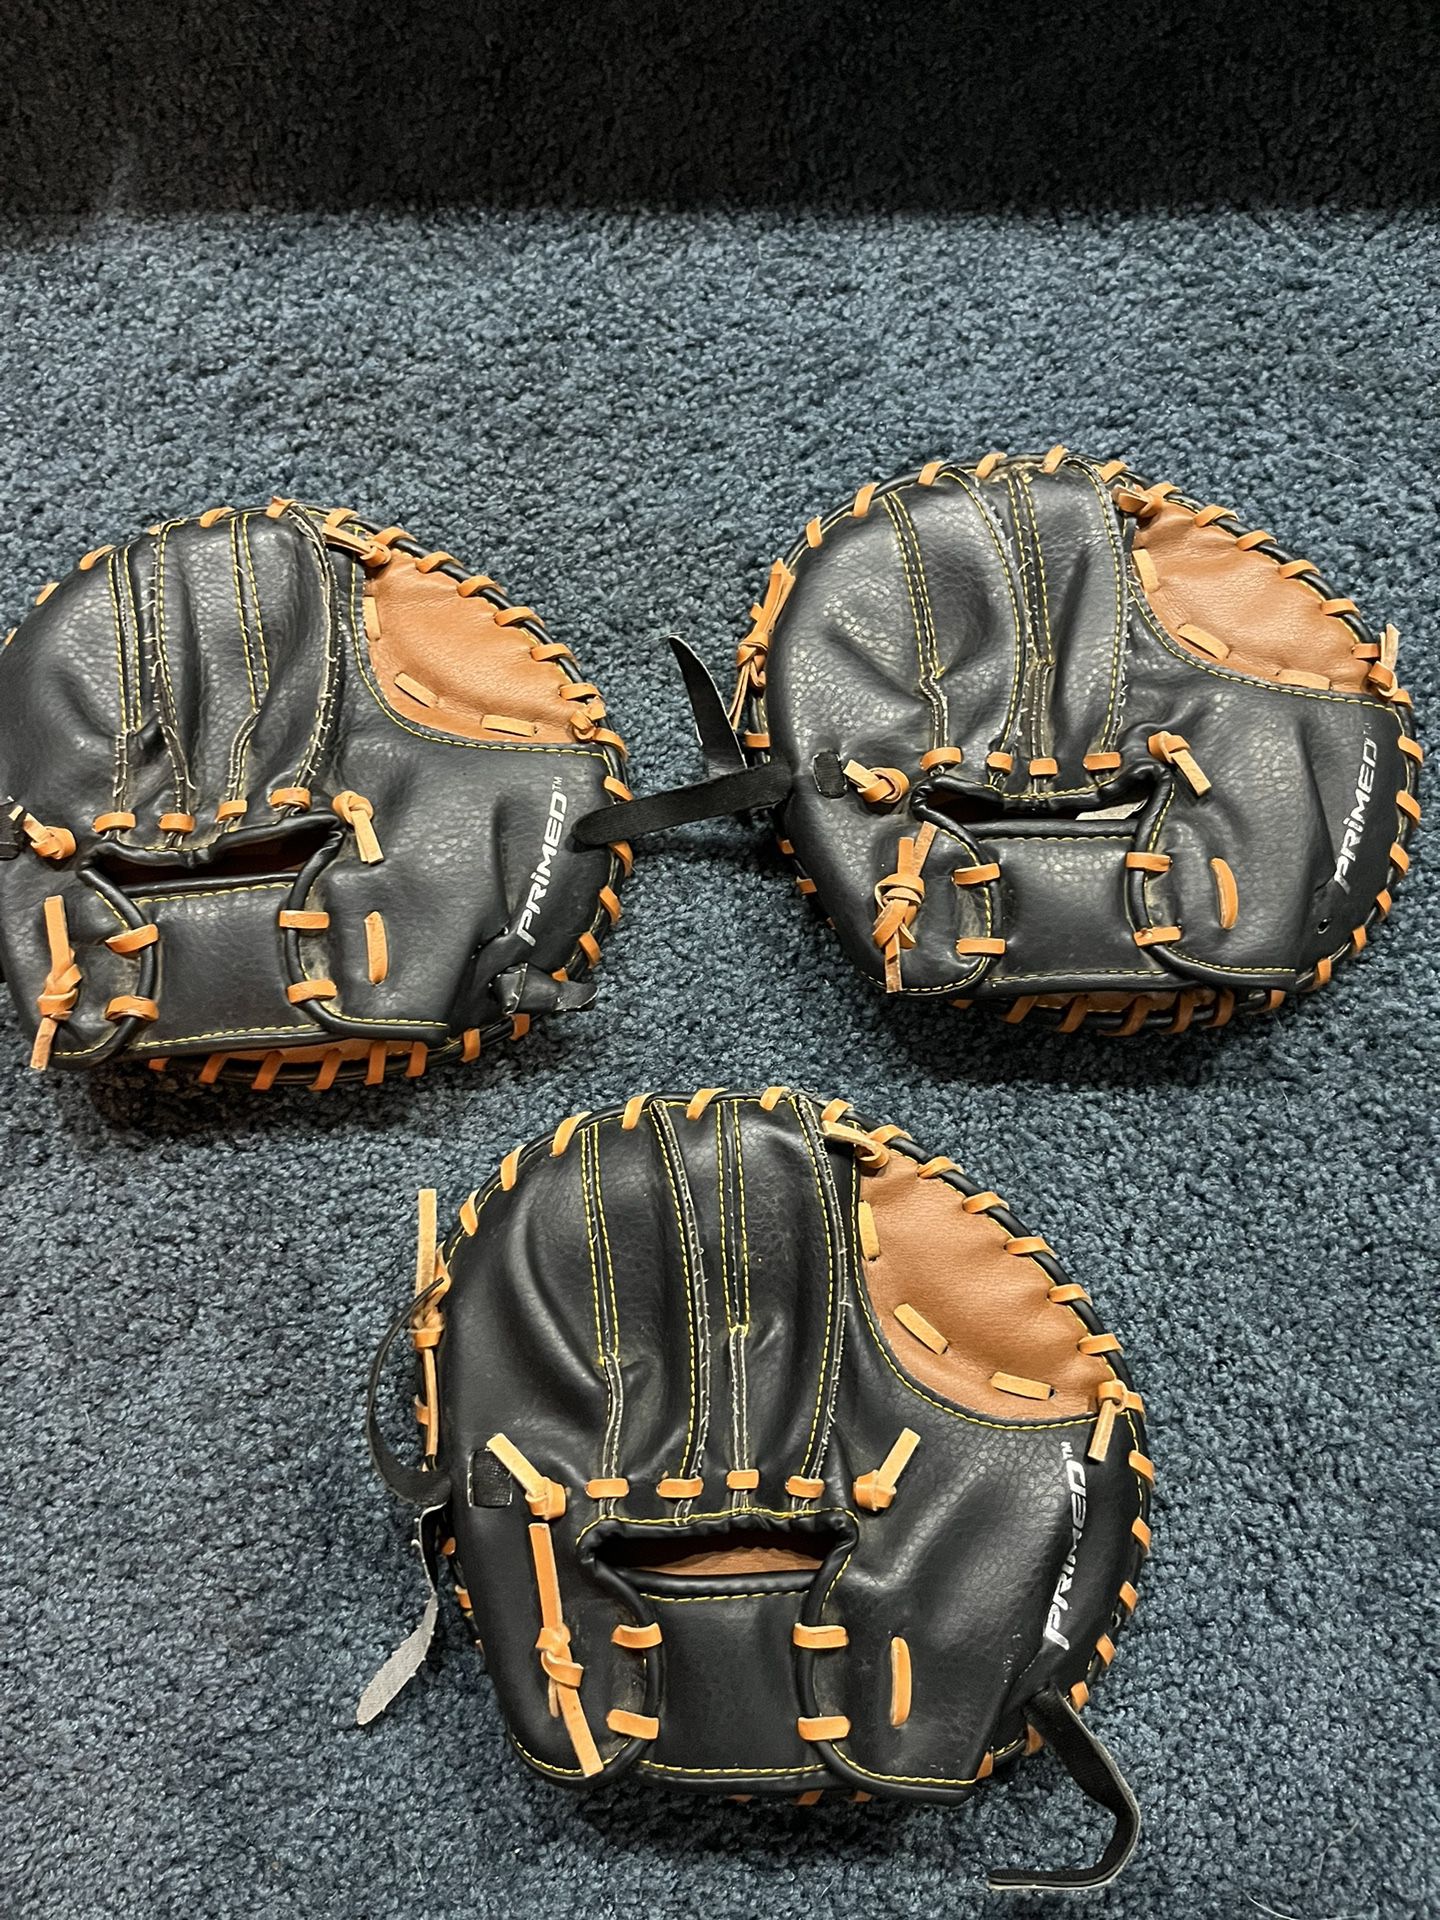 (3) PRIMED Infield Training Gloves lot of 3 | Right Handed Throw